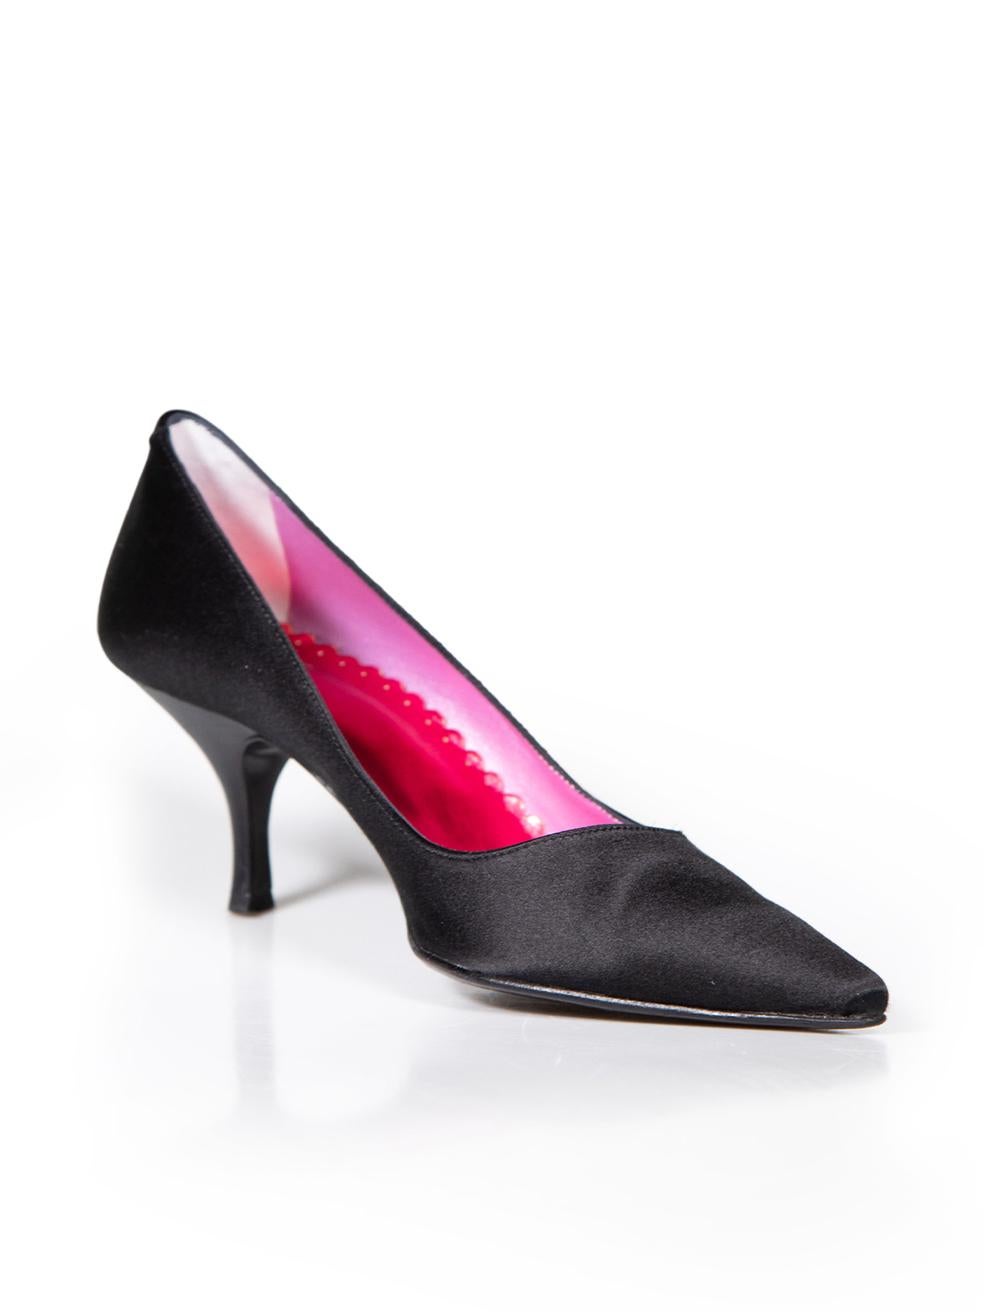 CONDITION is Very good. Minimal wear to pumps is evident. Small pluck to right side of right shoe. Small indent to back of left heel and minimal wear to soles on this used Mascaró designer resale item.
 
 
 
 Details
 
 
 Black
 
 Satin
 
 Pumps
 
